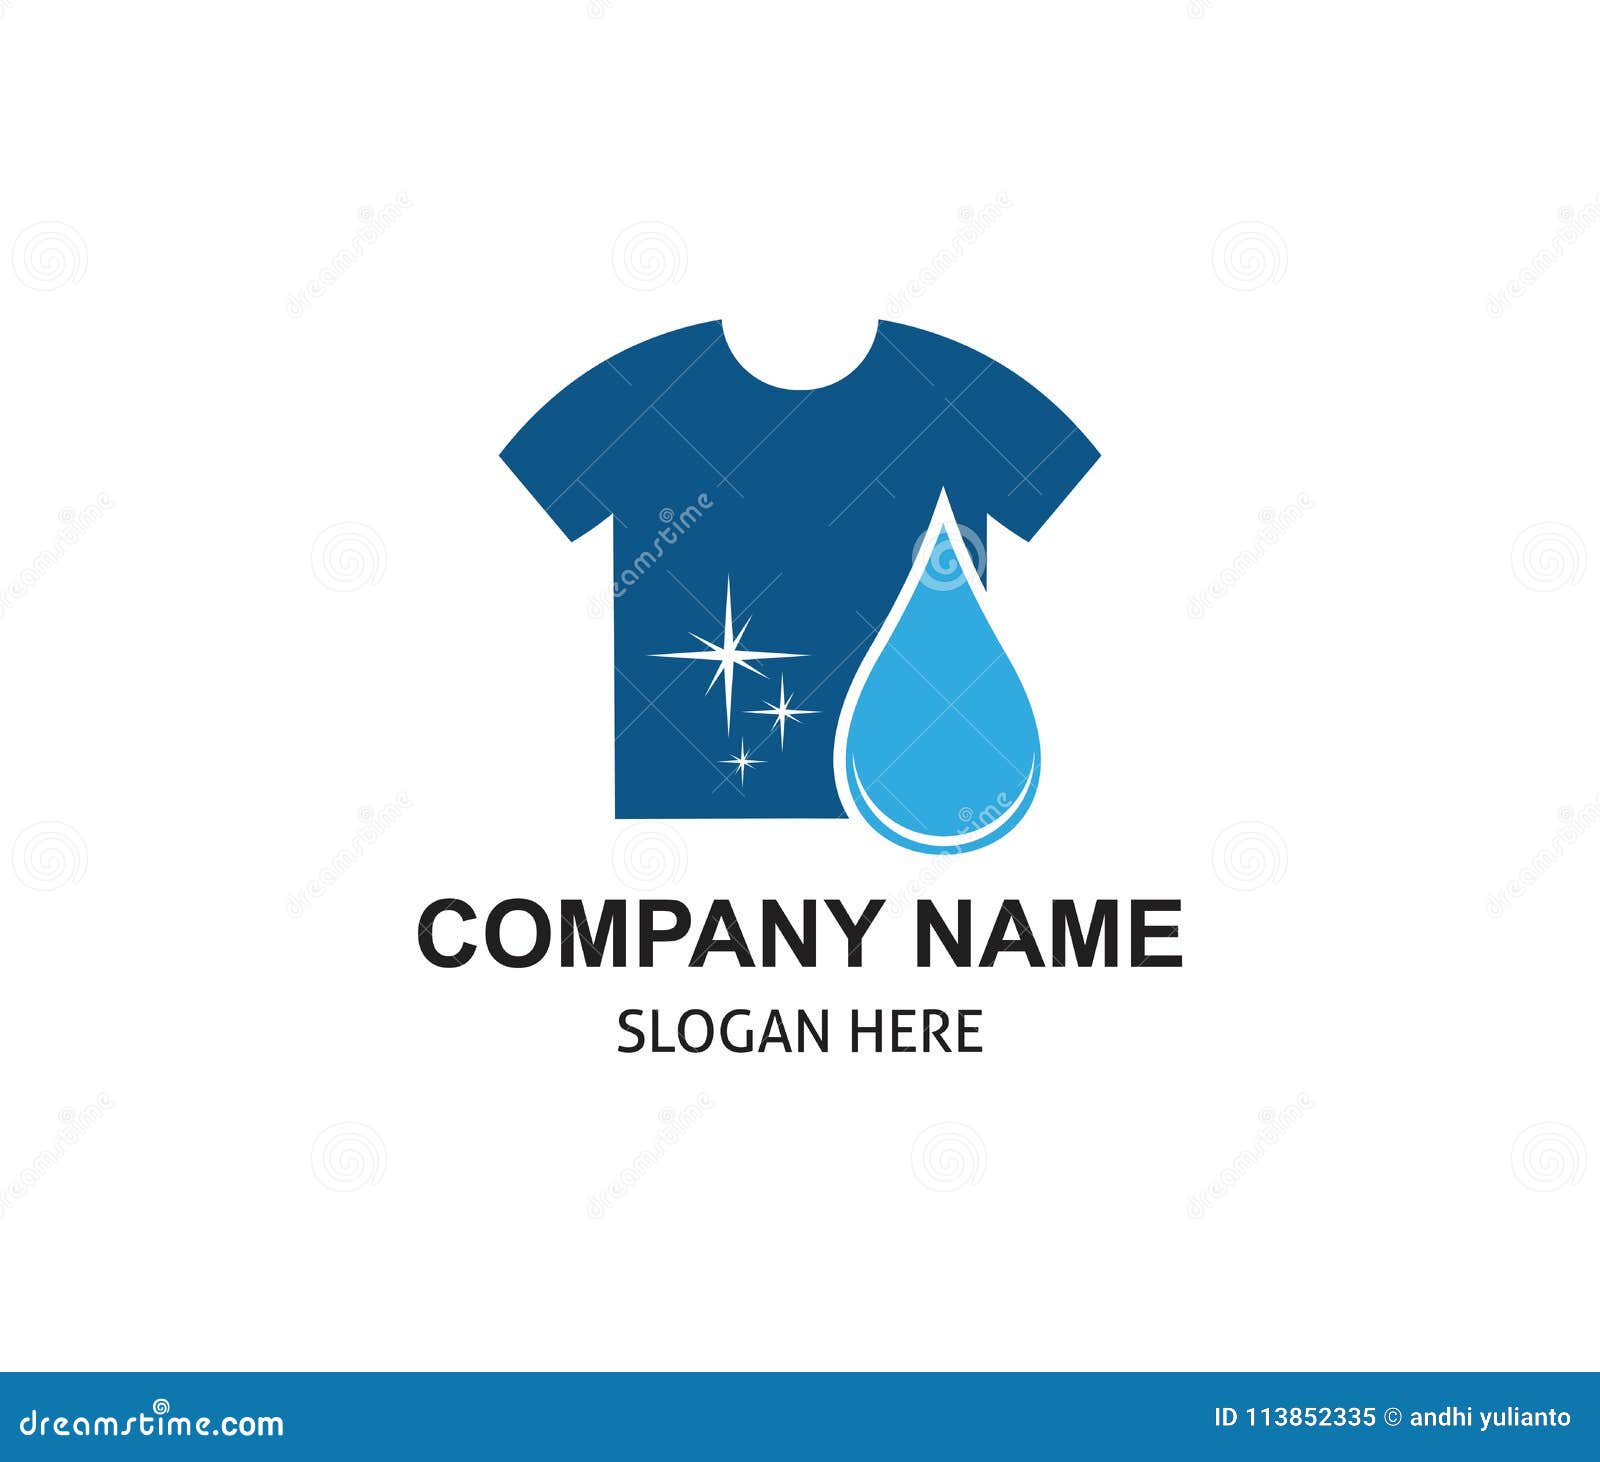 Fast and Clean Laundry Service Logo Design Stock Illustration ...